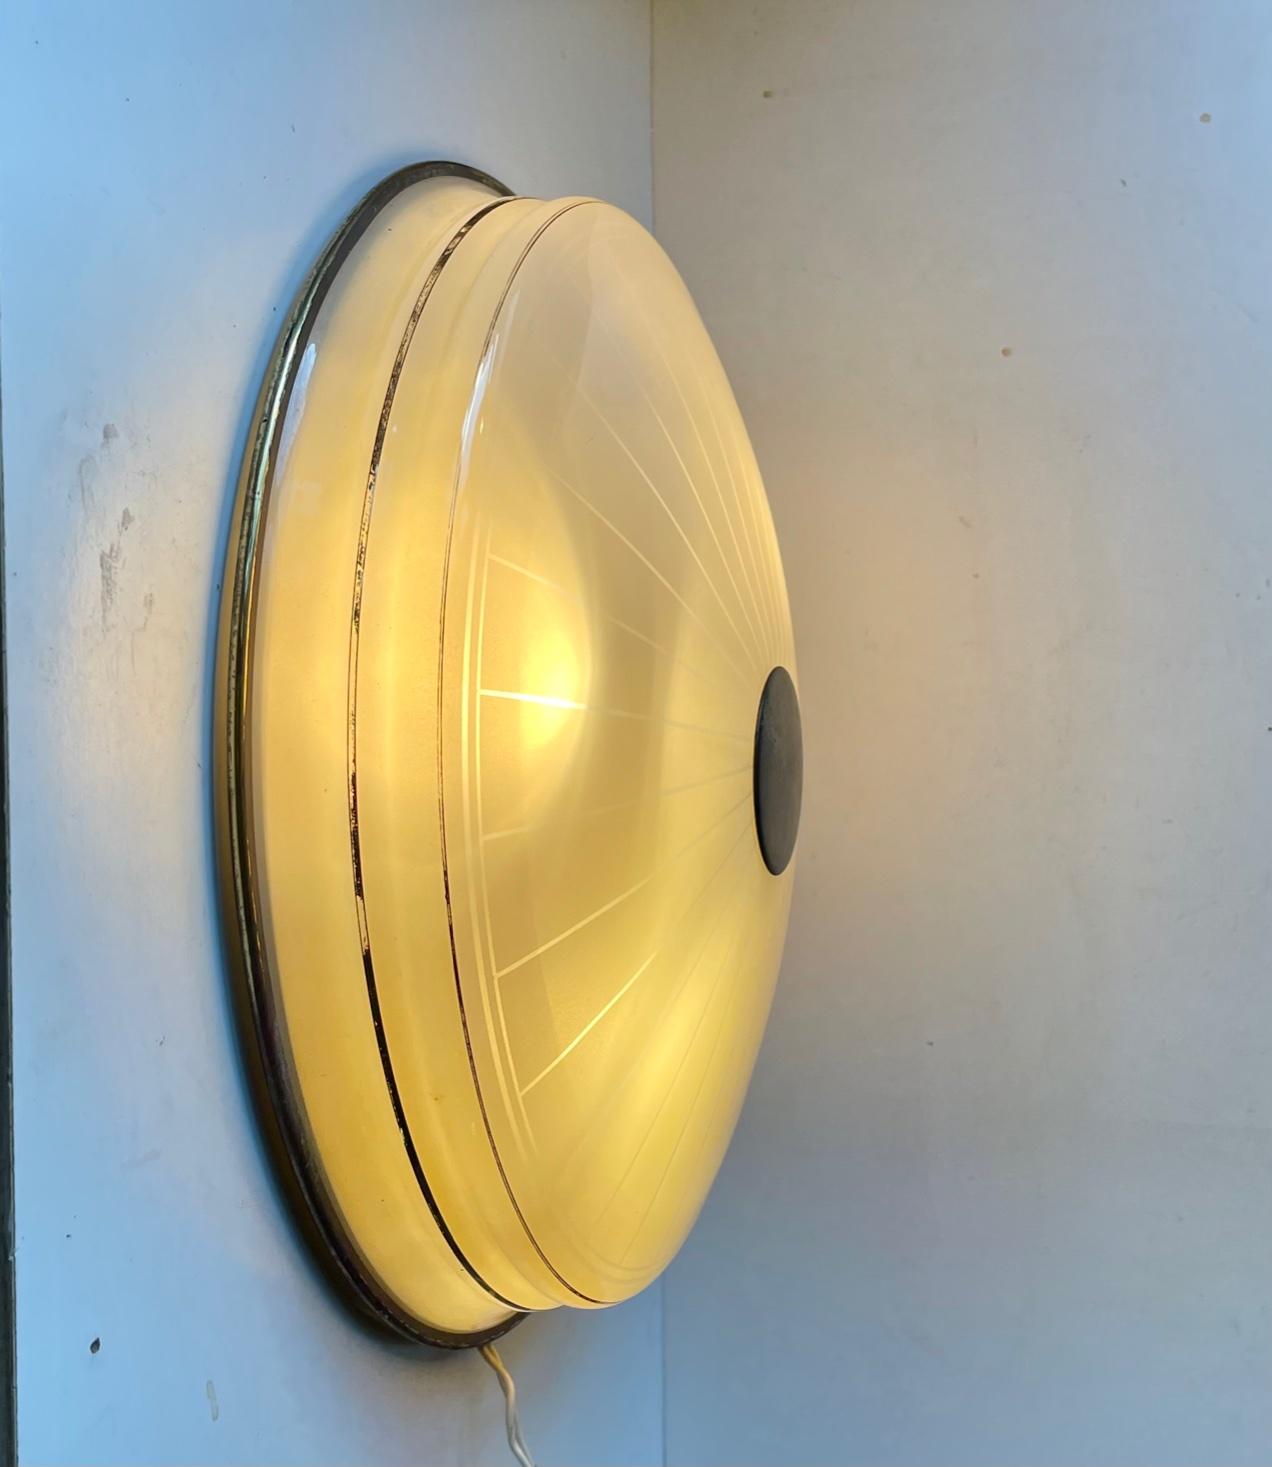 A large flush mount chandelier or wall sconce manufactured by Lyfa in Denmark during the 1950s or early 60s. The piece features a large pin-striped glass shade with applied gold glazes, six internal light bulbs and a backplate/mount in solid brass.